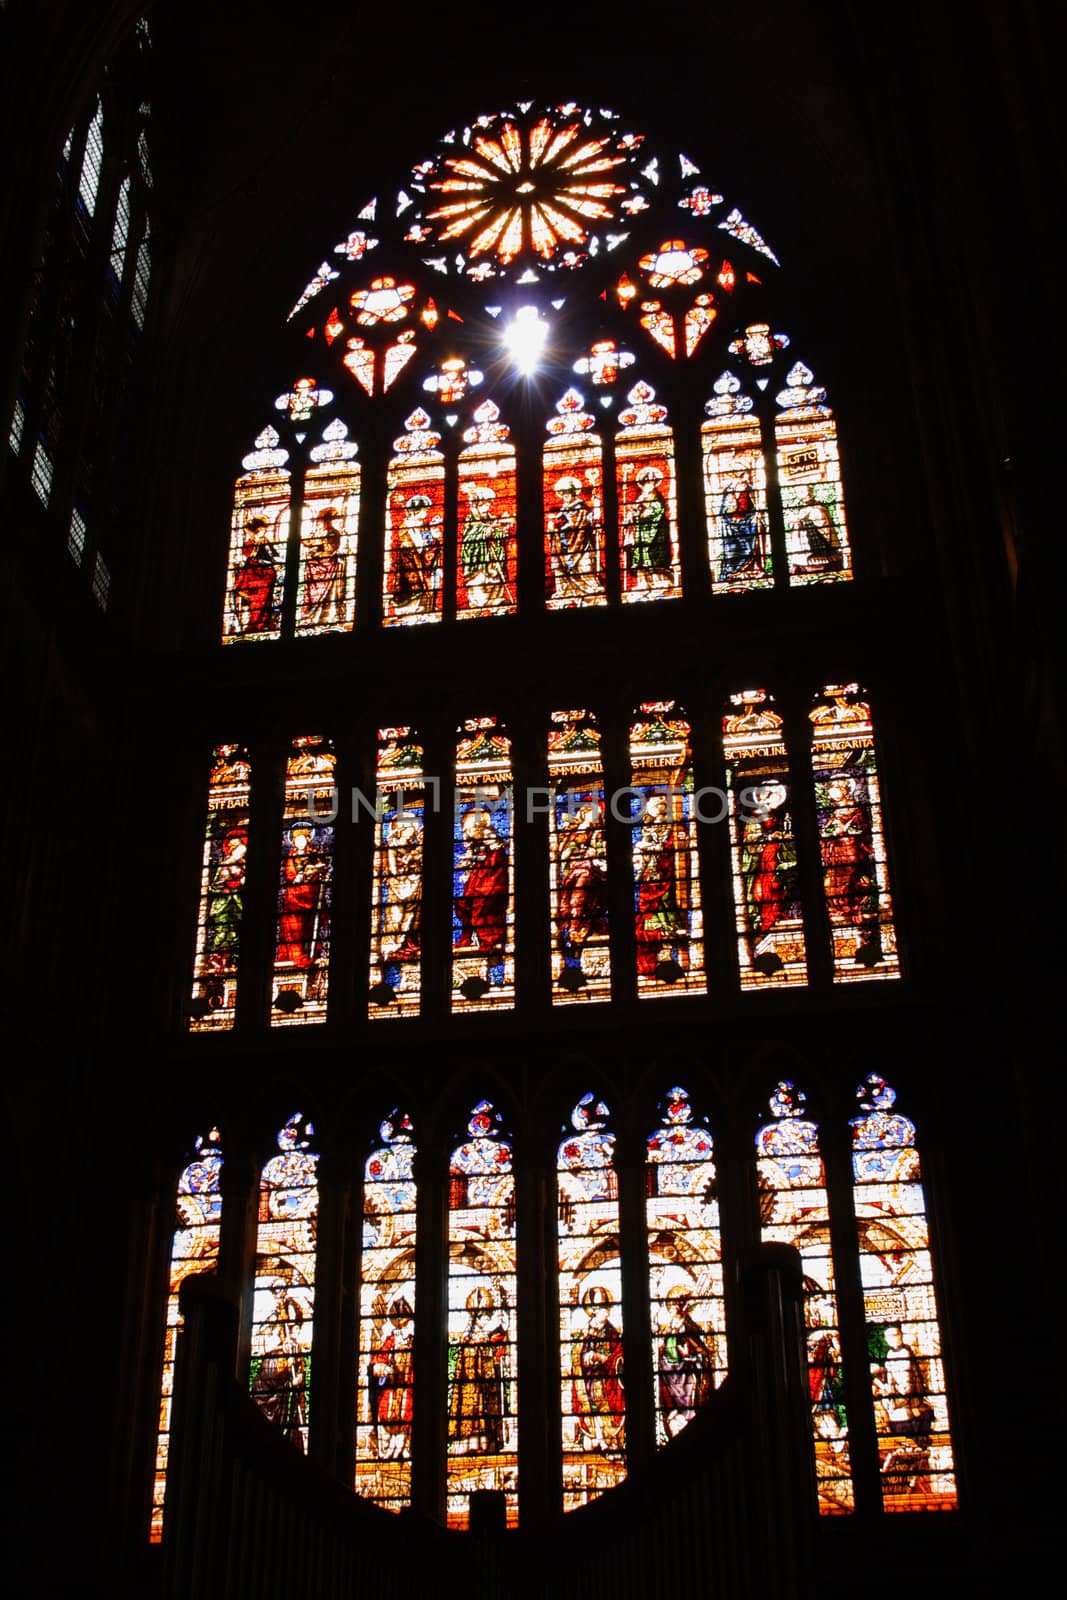 One the beautiful stained glass windows in the Metz Cathedral, Lorraine, France.